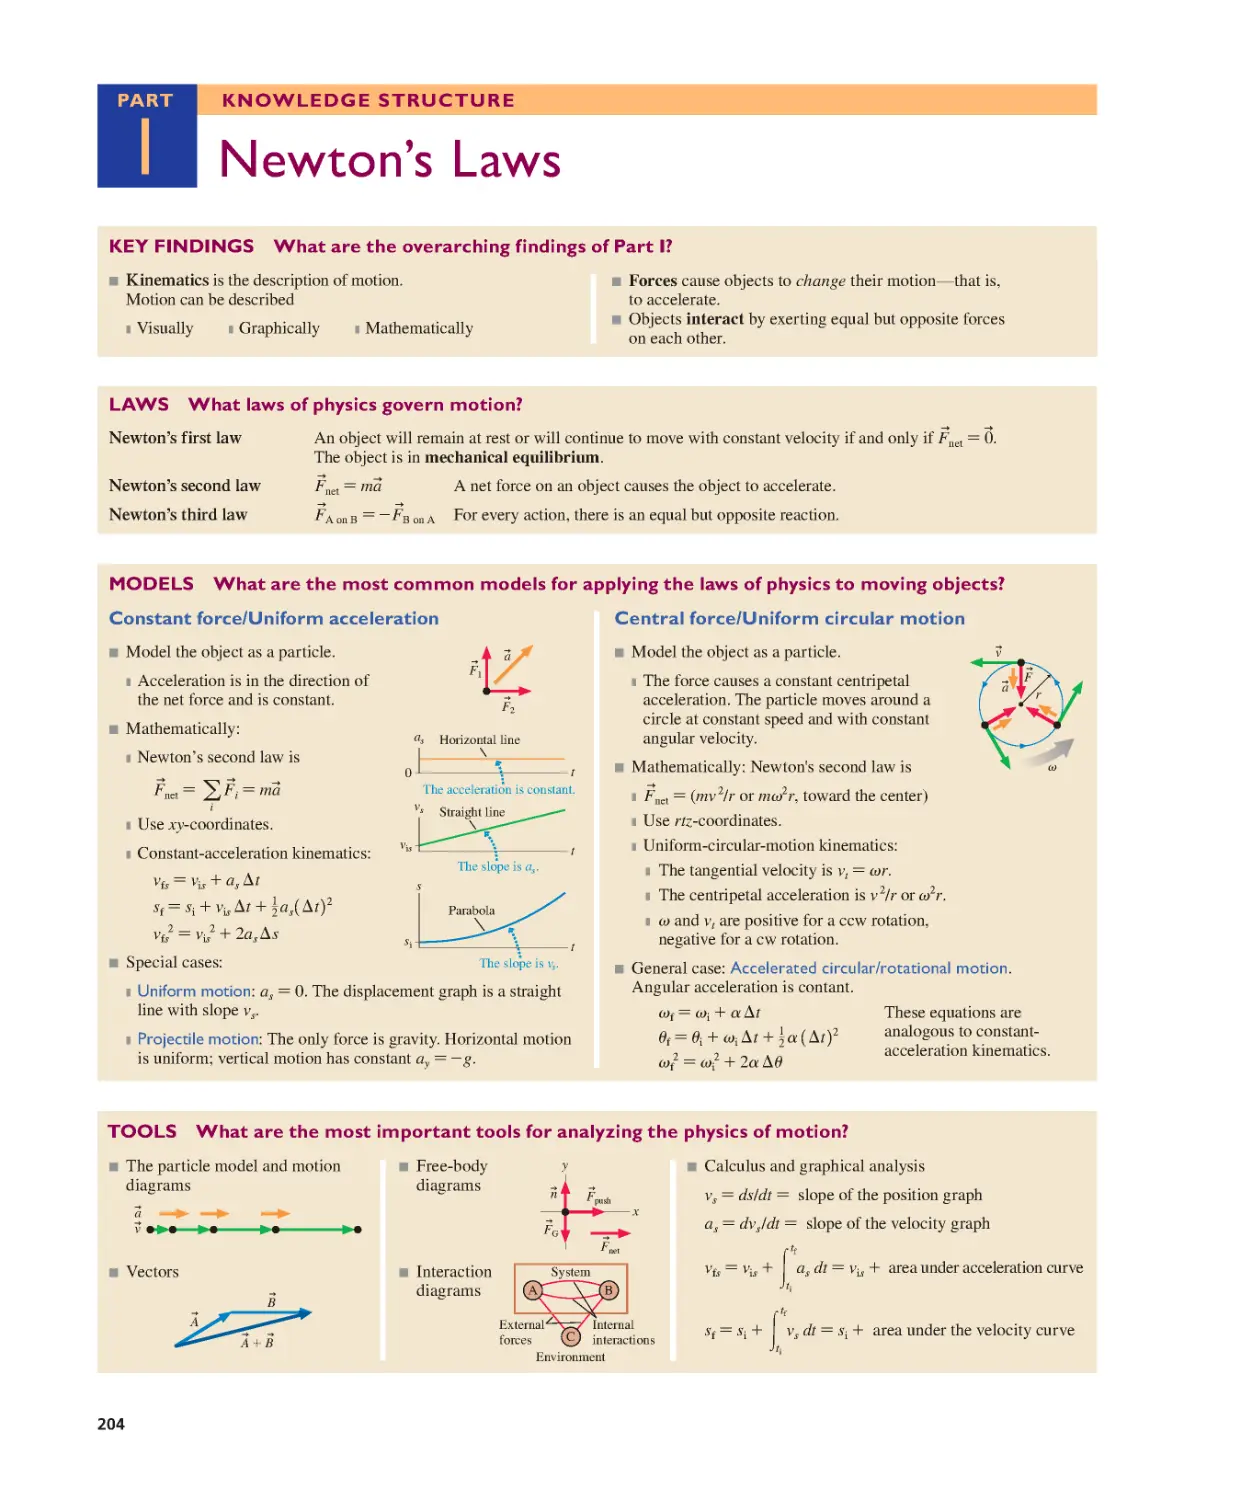 Part I: Knowledge Structure: Newton’s Laws